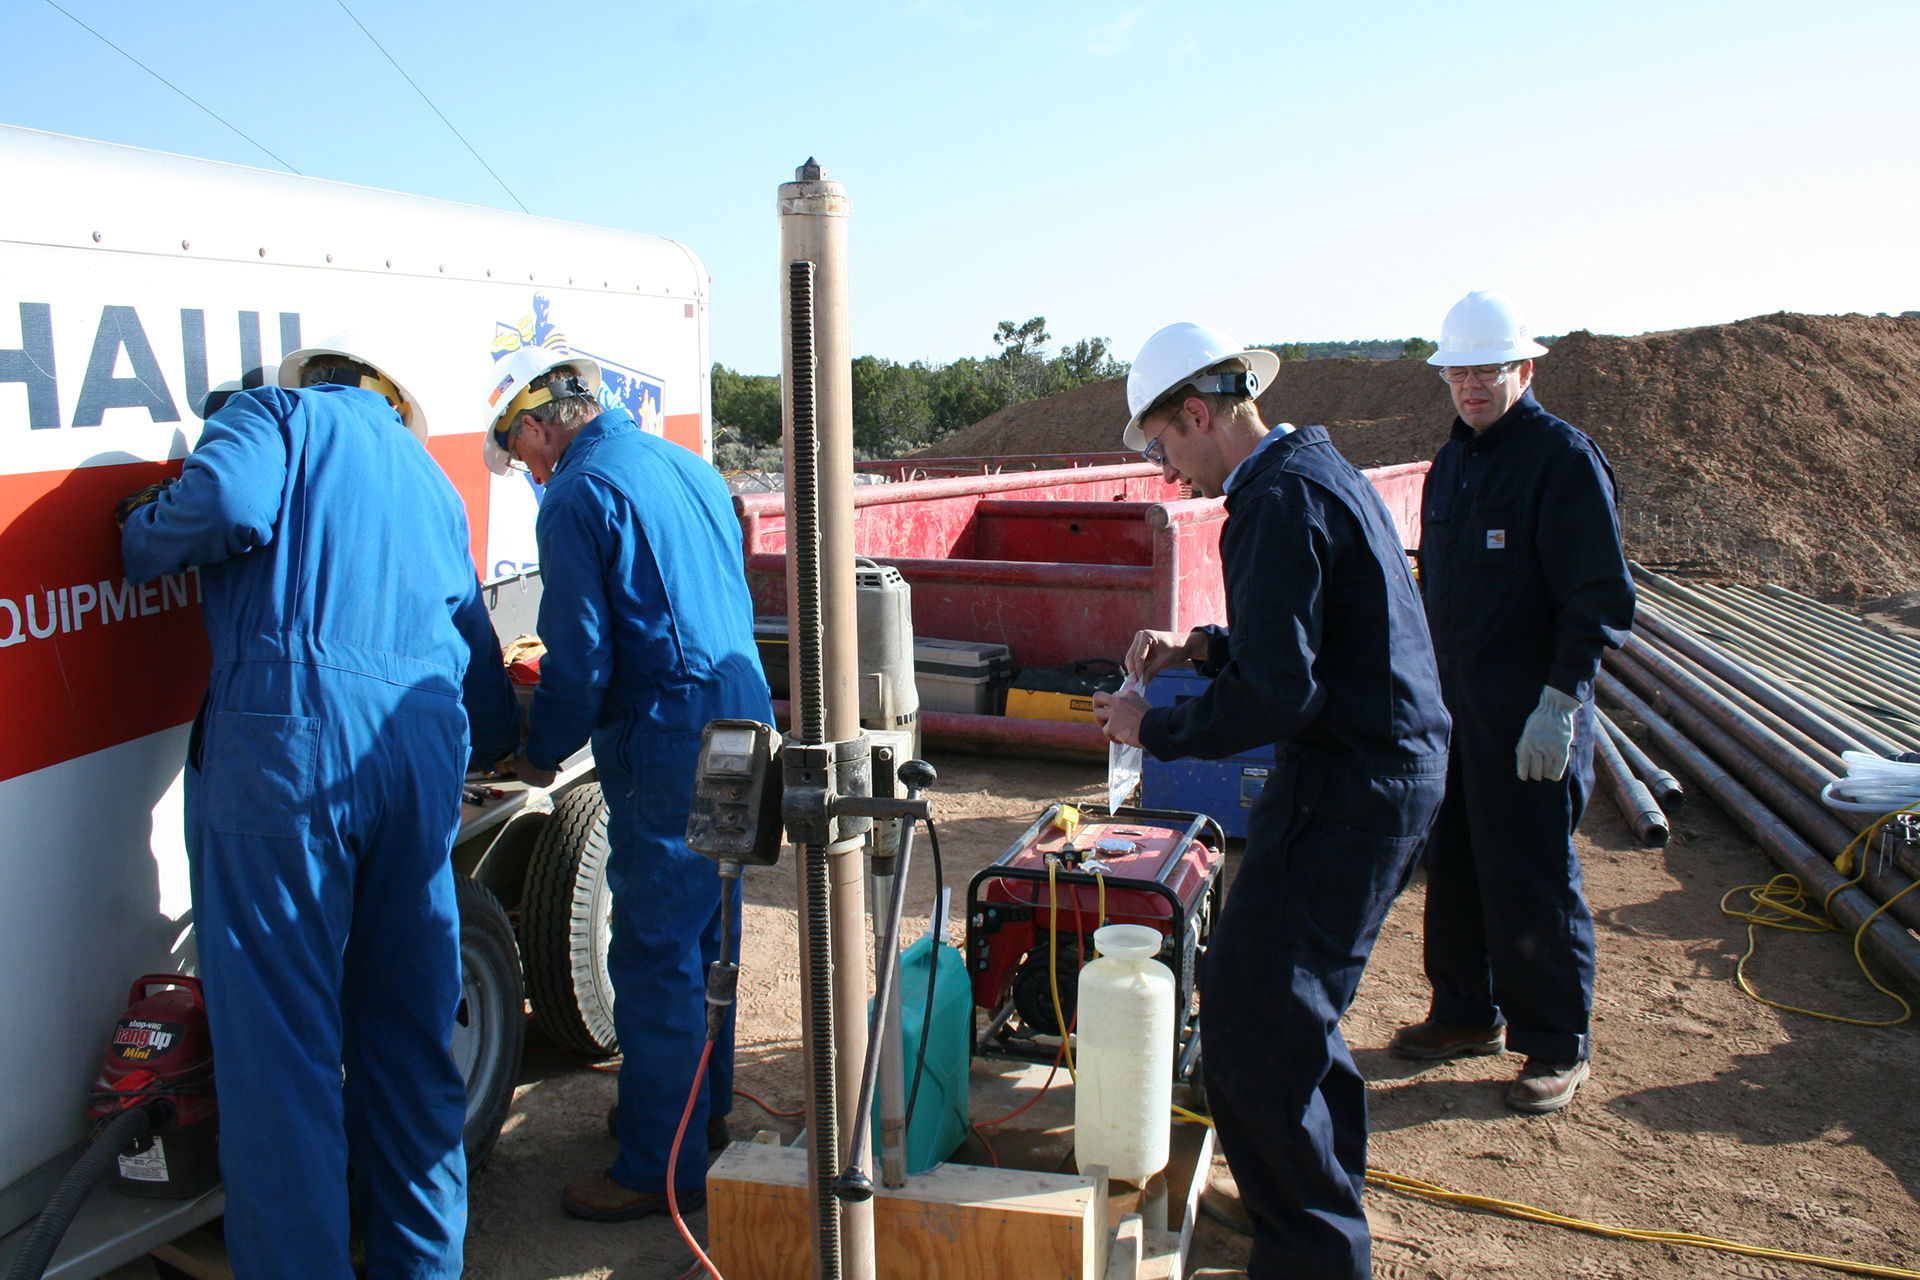 Dr. Reid Grigg (right) of the Petroleum Recovery Research Center (PRRC) looks on as members of the Southwest Regional Partnership on Carbon Sequestration (SWP) team work to collect noble gas samples as cores come out of the barrel. Analysis of noble gases was used to determine the natural helium concentrations, helium gradients, and 3He/4He ratios, which are being used to determine transport properties of the Kirtland and concomitant sealing behavior.